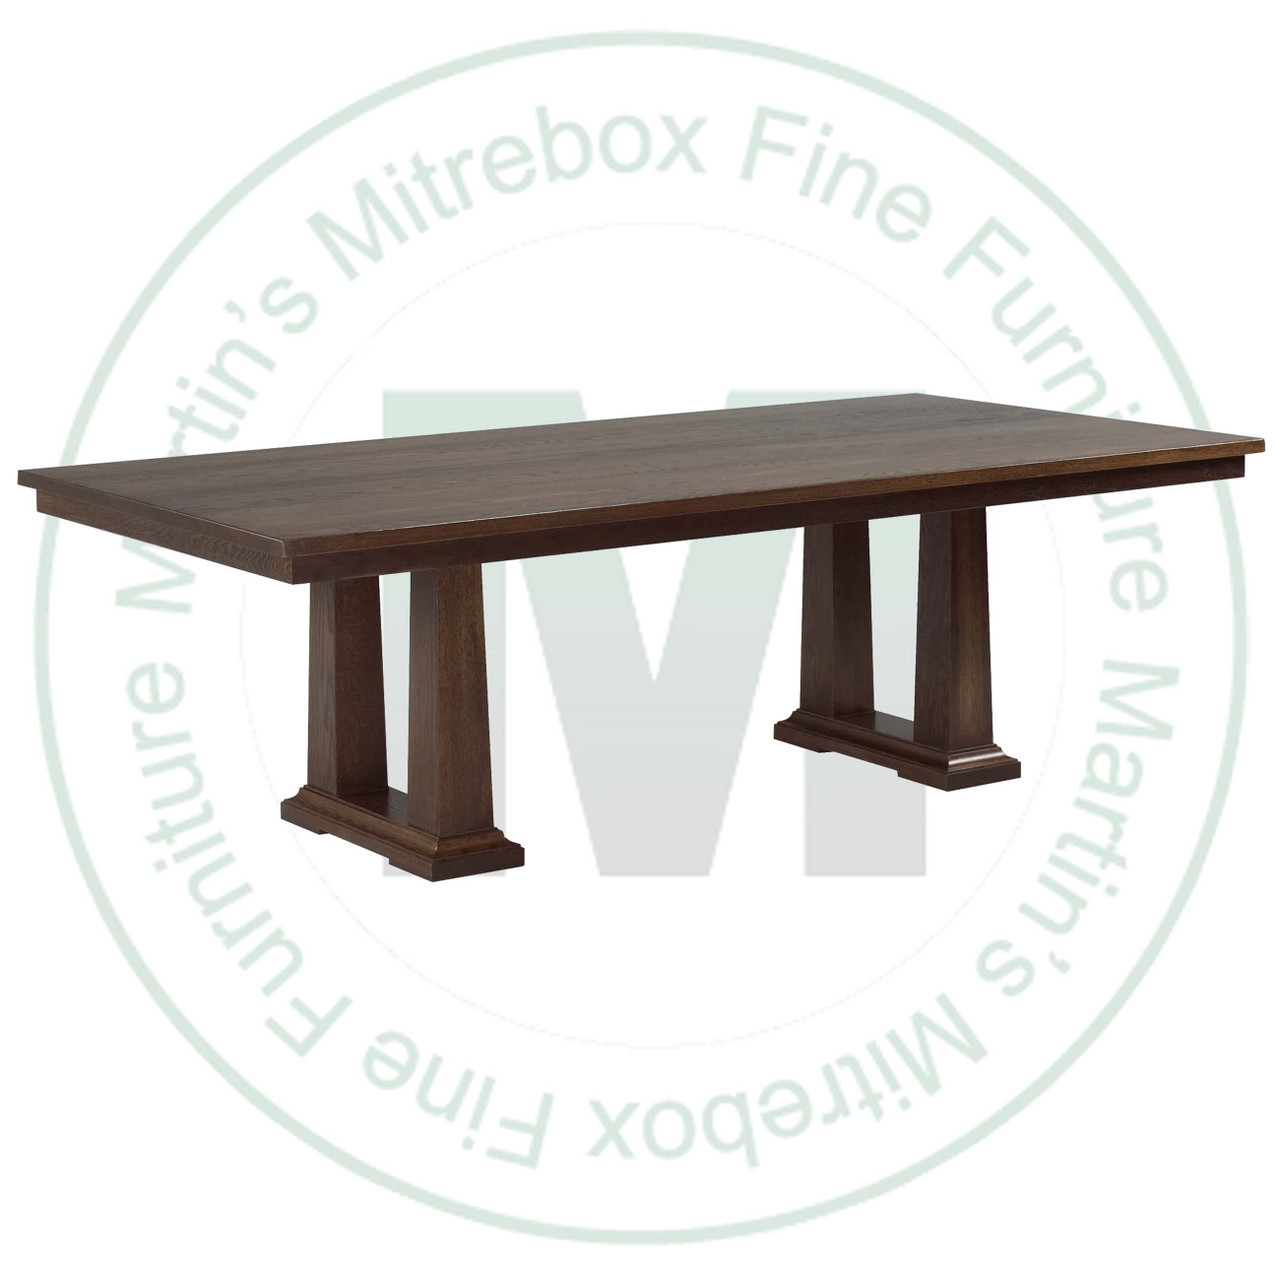 Maple Acropolis Extension Double Pedestal Table 42''D x 72''W x 30''H With 3 - 12'' Leaves Table Has 1.75'' Thick Top